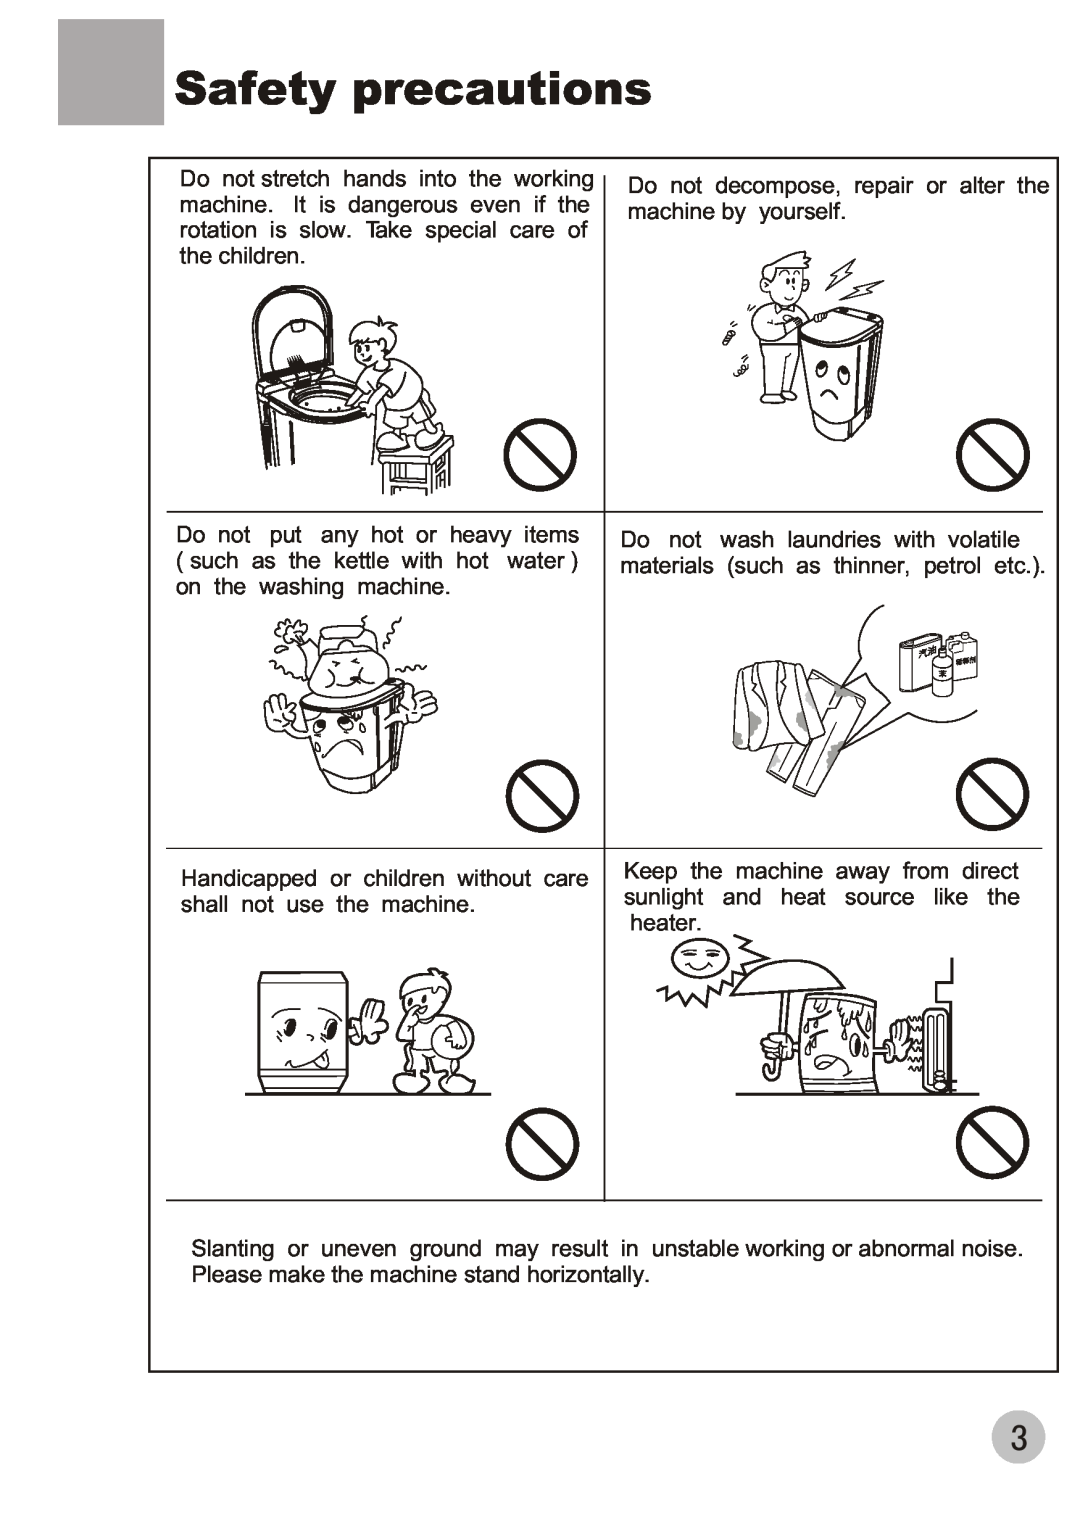 Haier T60-32 user manual Safety precautions, Do not decompose, repair or alter the machine by yourself 